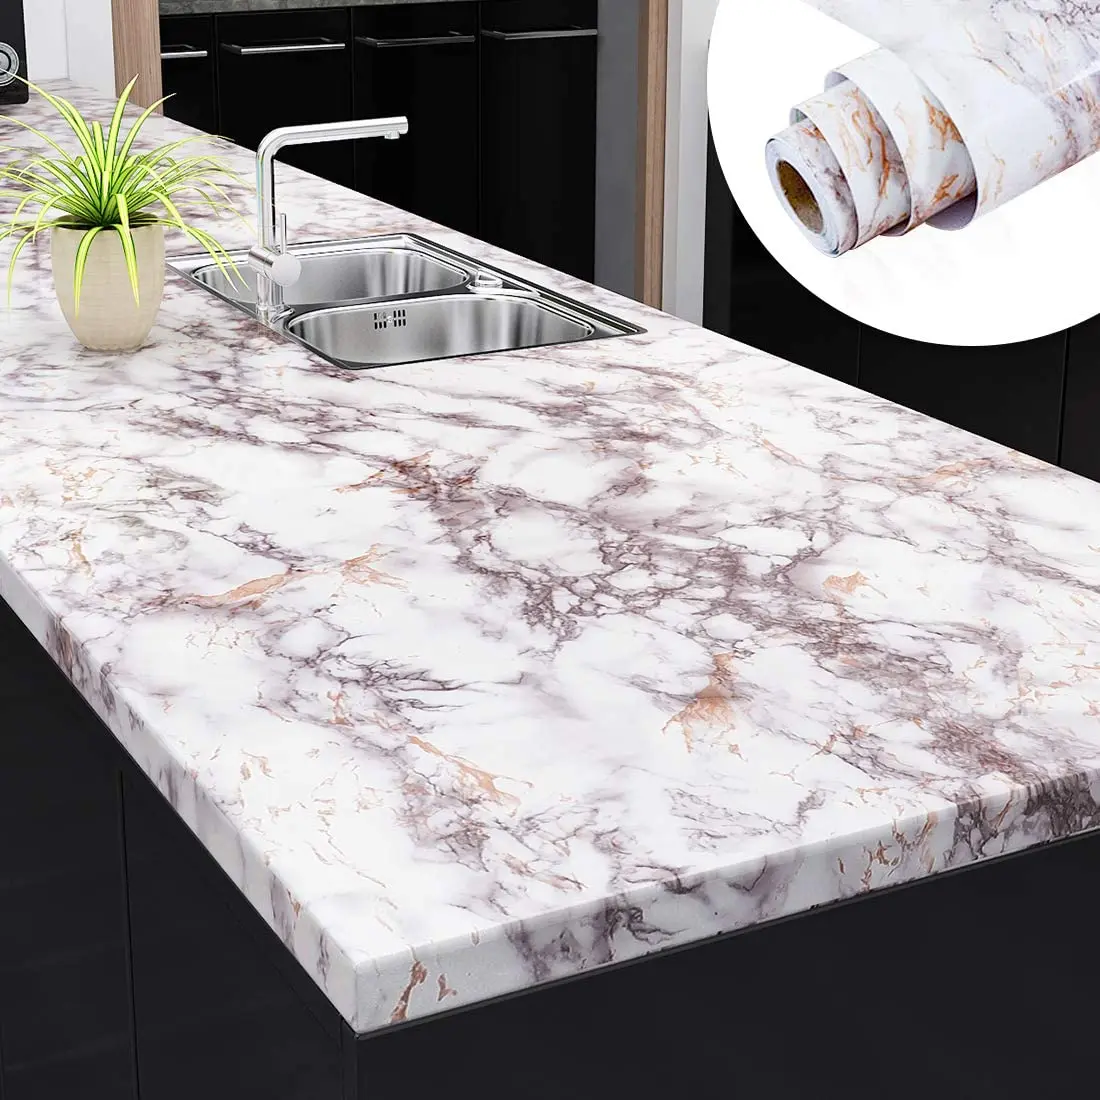 

Waterproof Marble Contact Paper for Countertops Cabinets Vinyl Self Adhesive Oil Proof Wallpaper Laminate Sheets Decor Kitchen